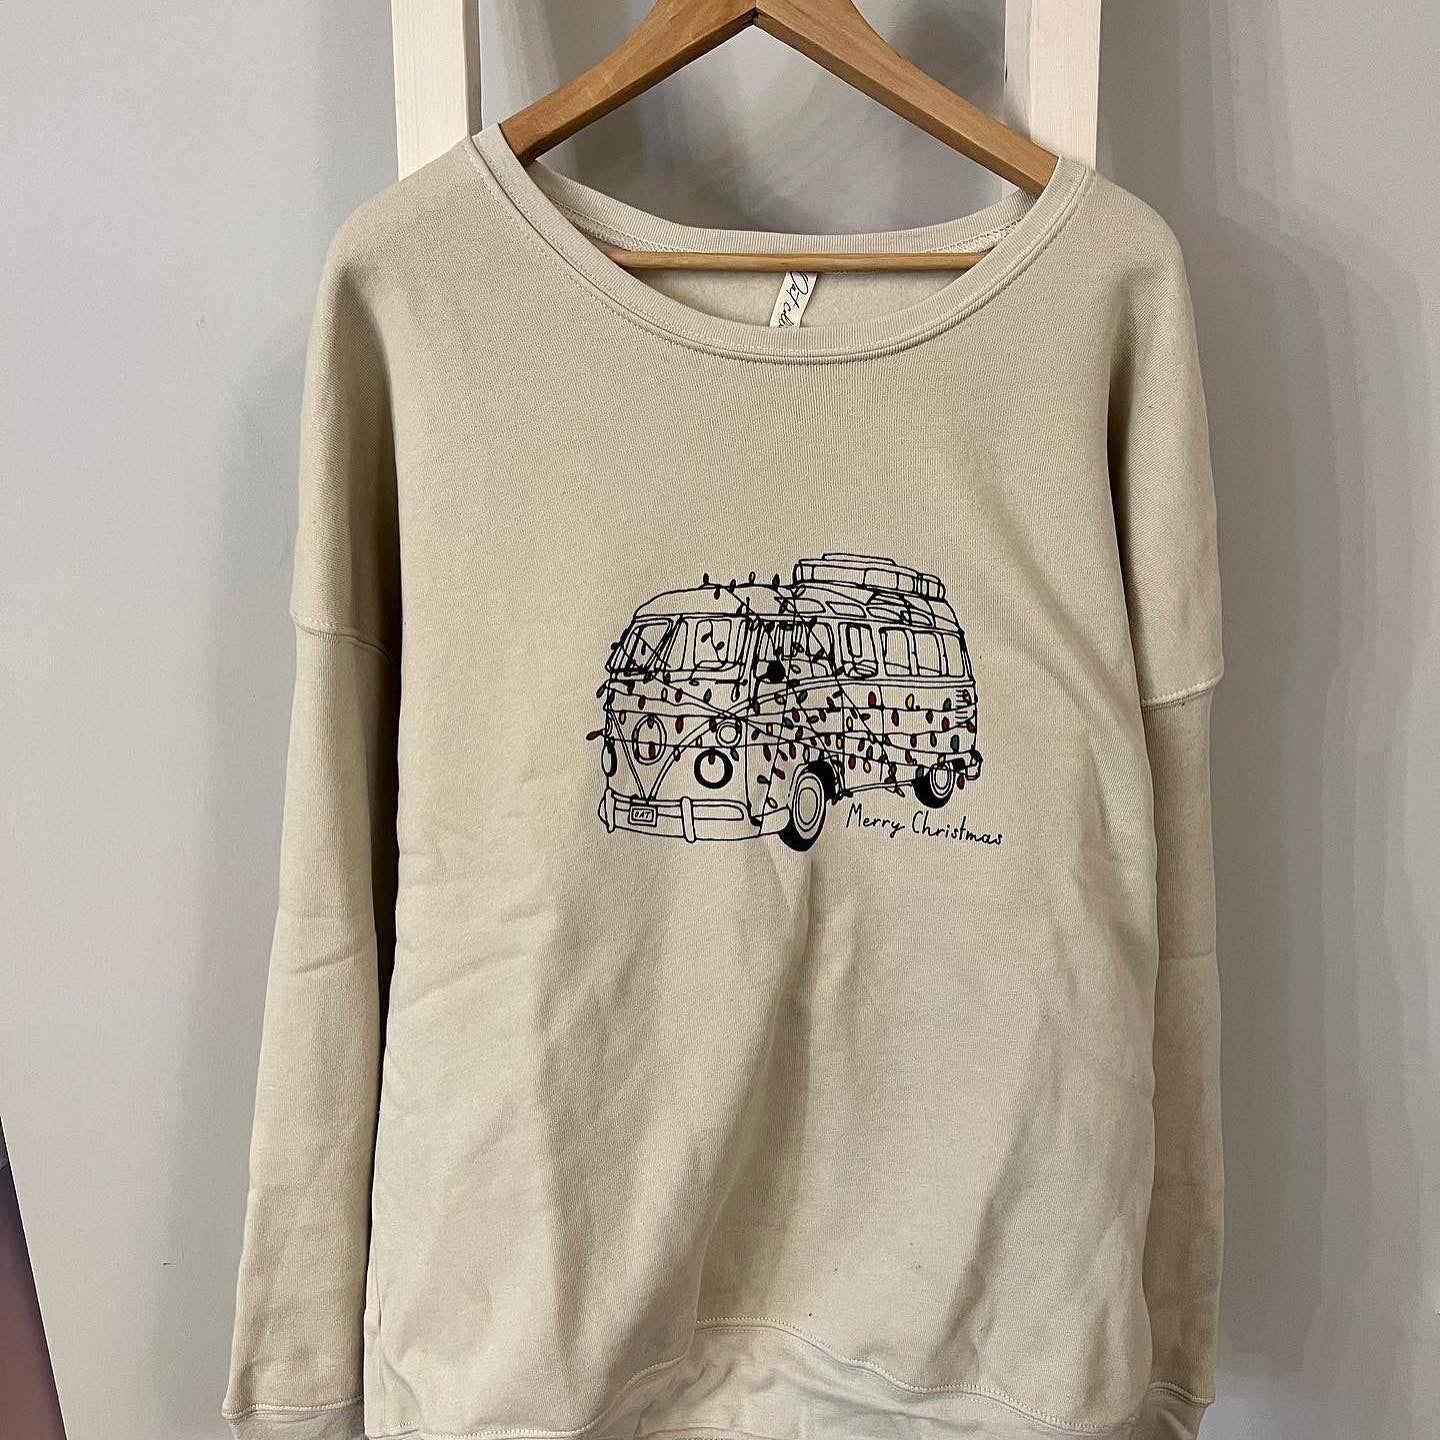 PLUS SIZE MERRY CHRISTMAS VOLKSWAGEN BUS Graphic Sweatshirt - the friday collective